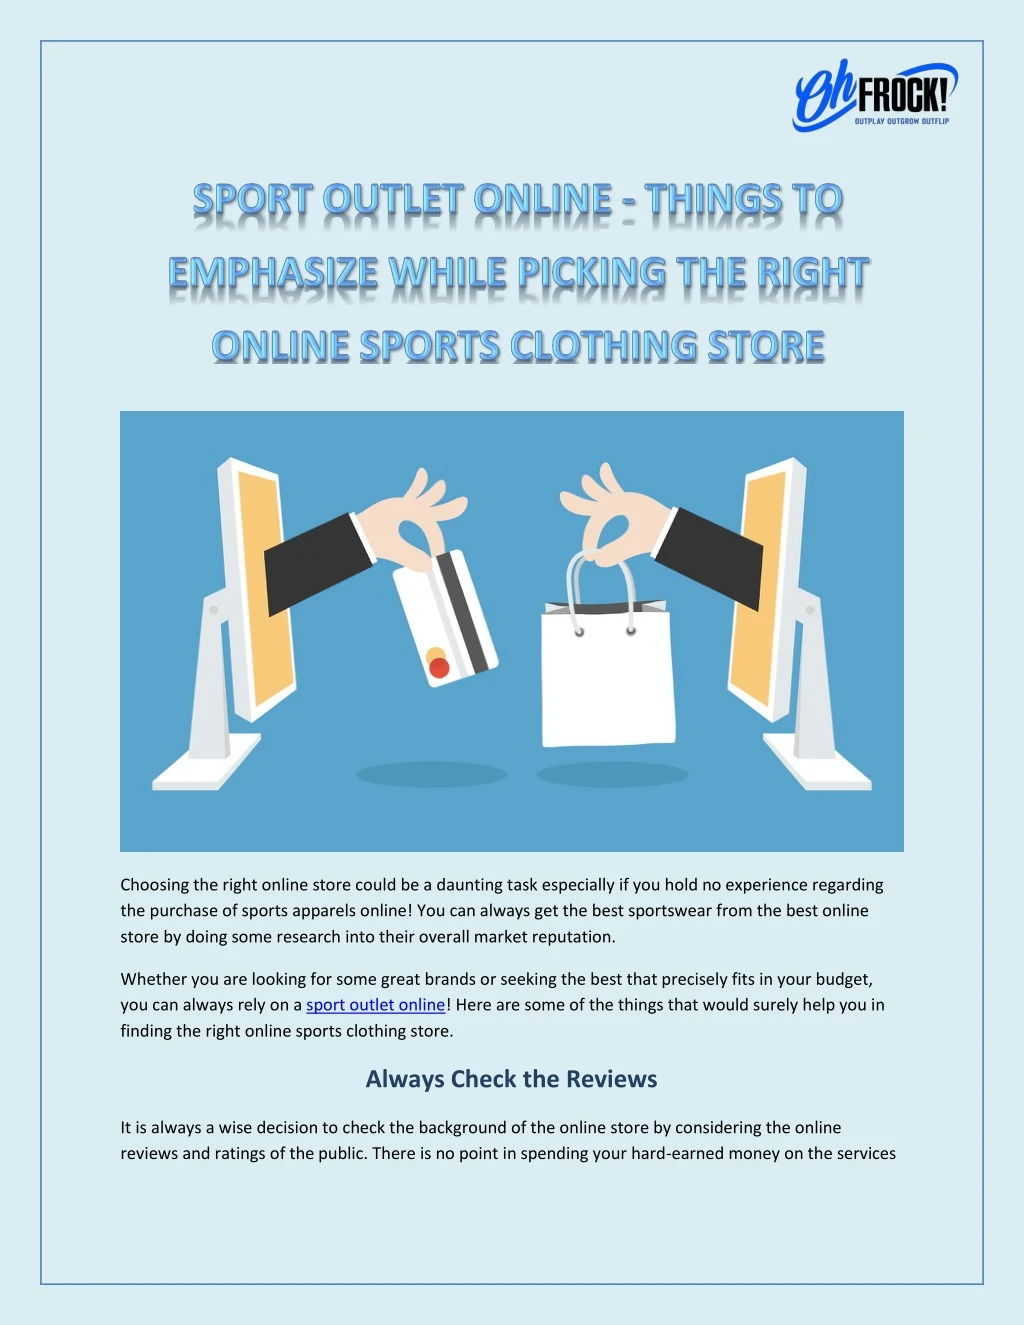 choosing the right online store could